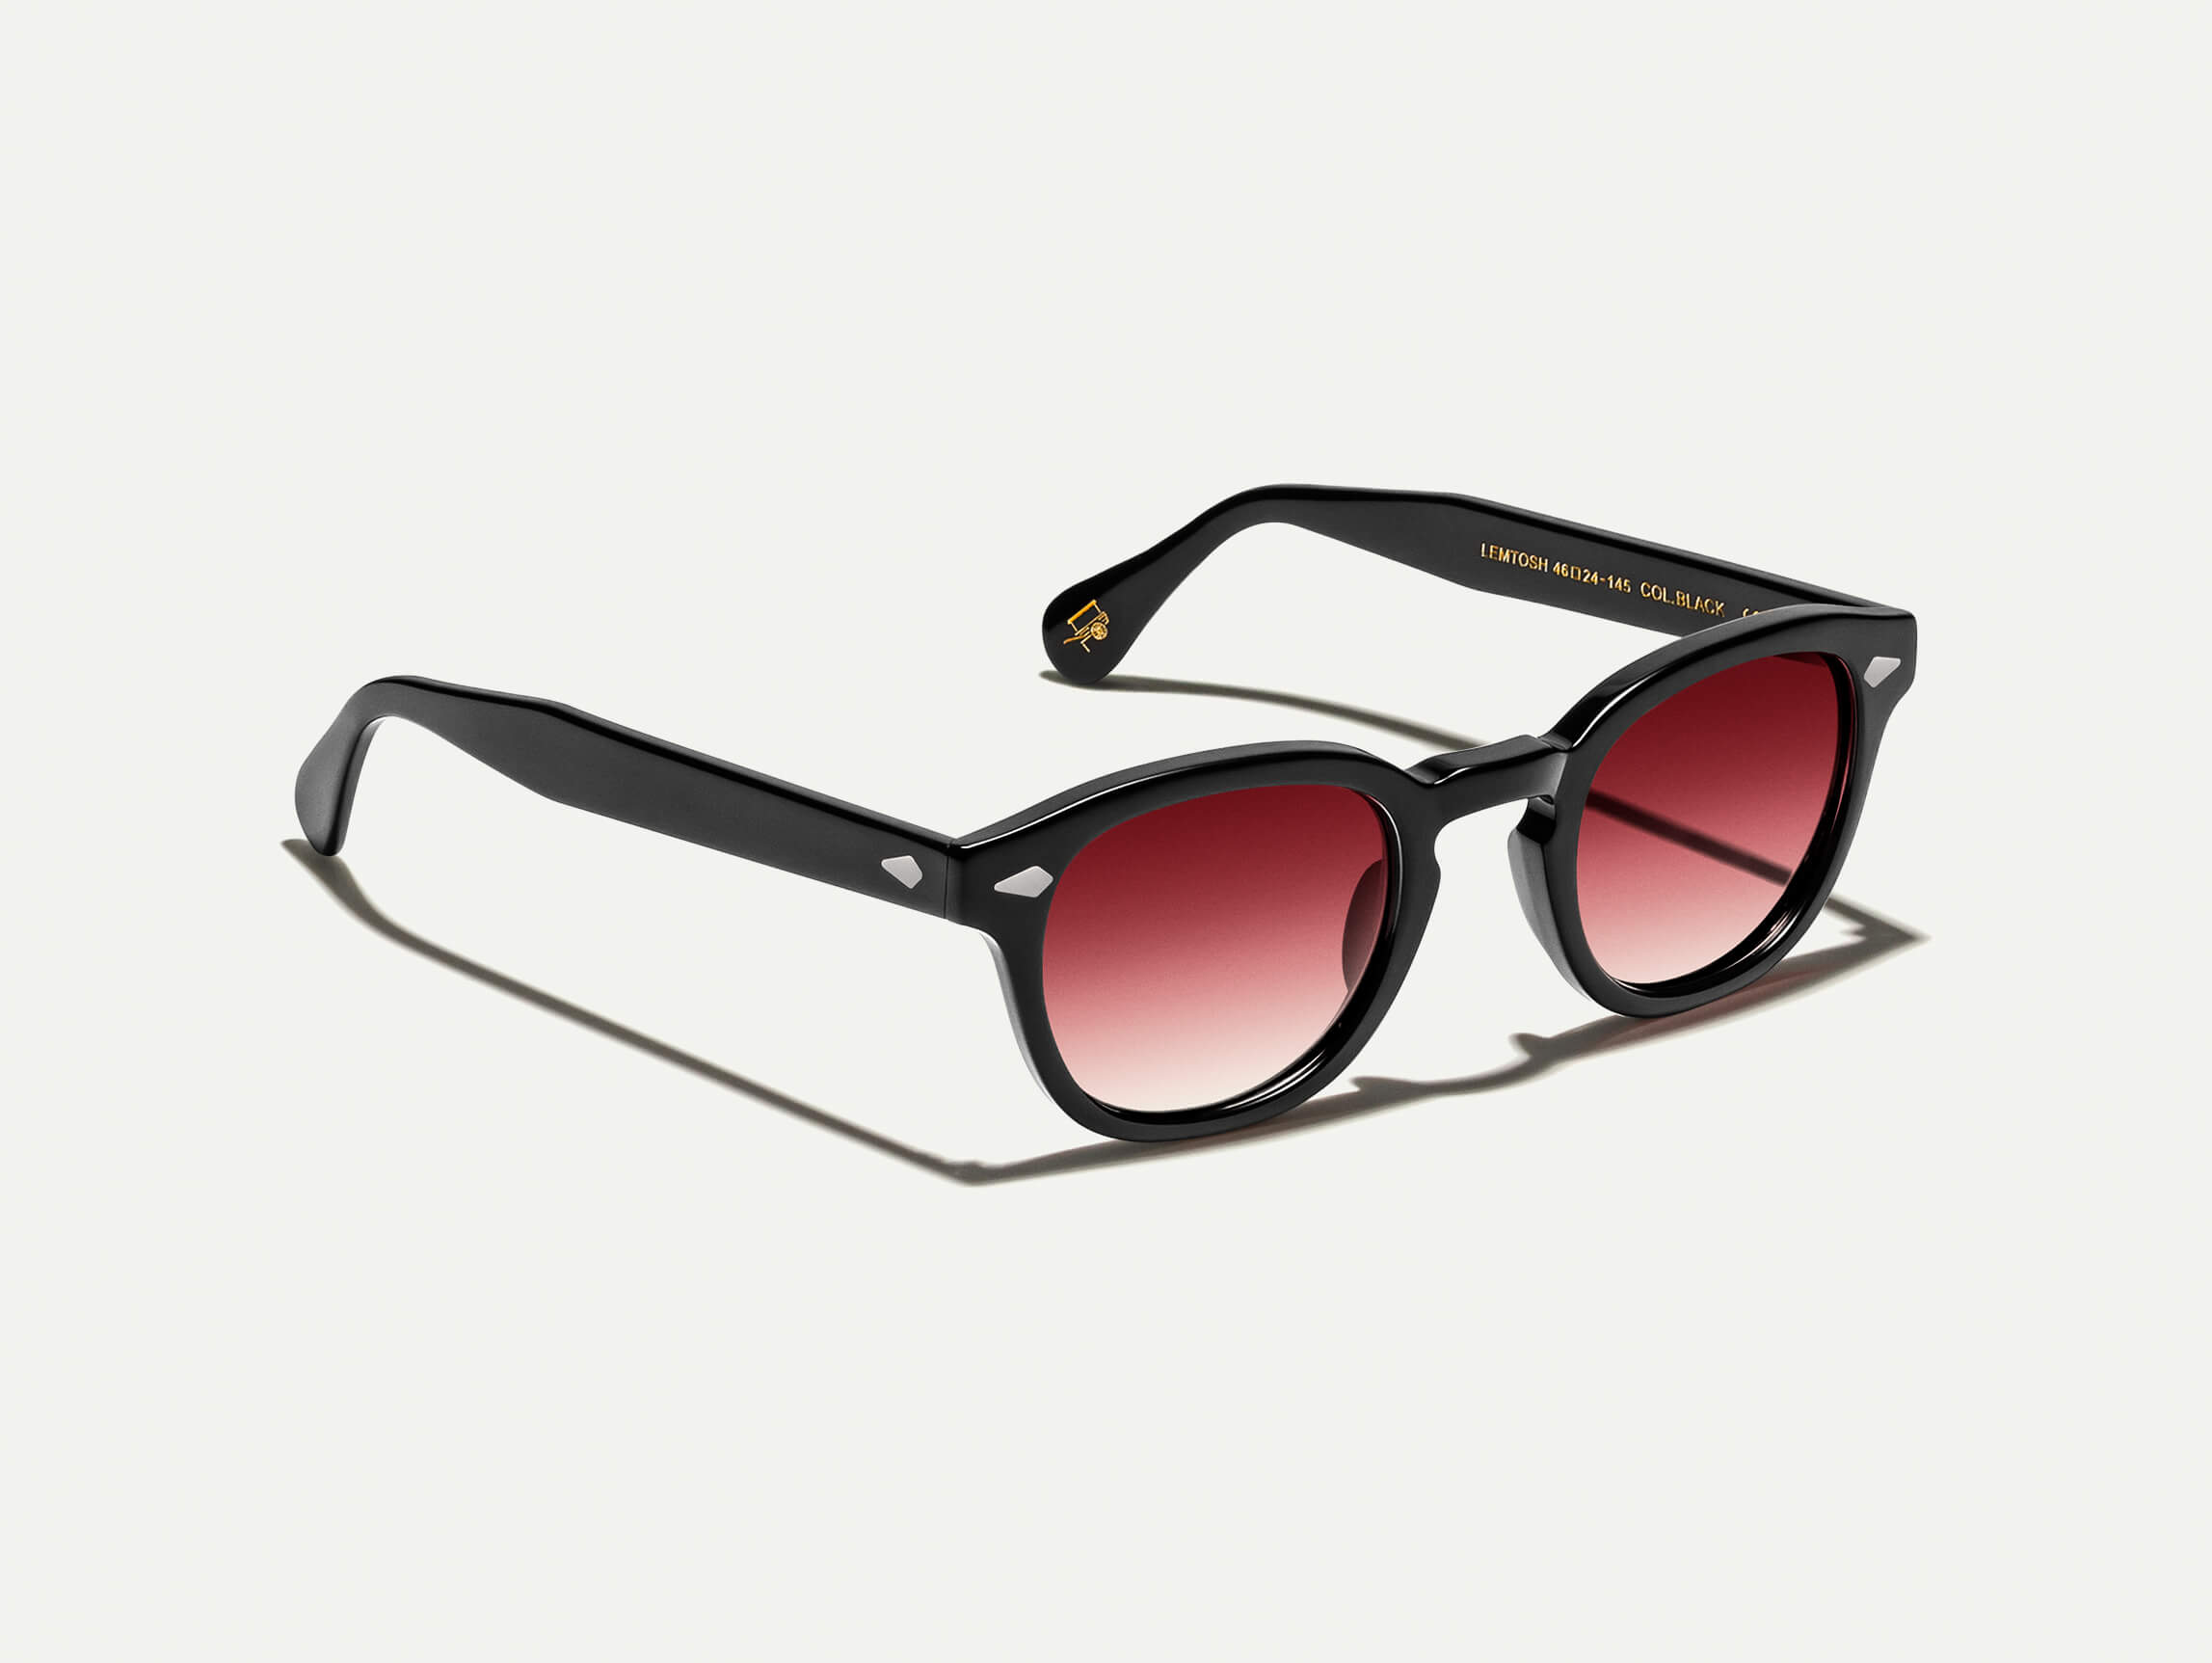 The LEMTOSH Black with Big Apple Fade Tinted Lenses